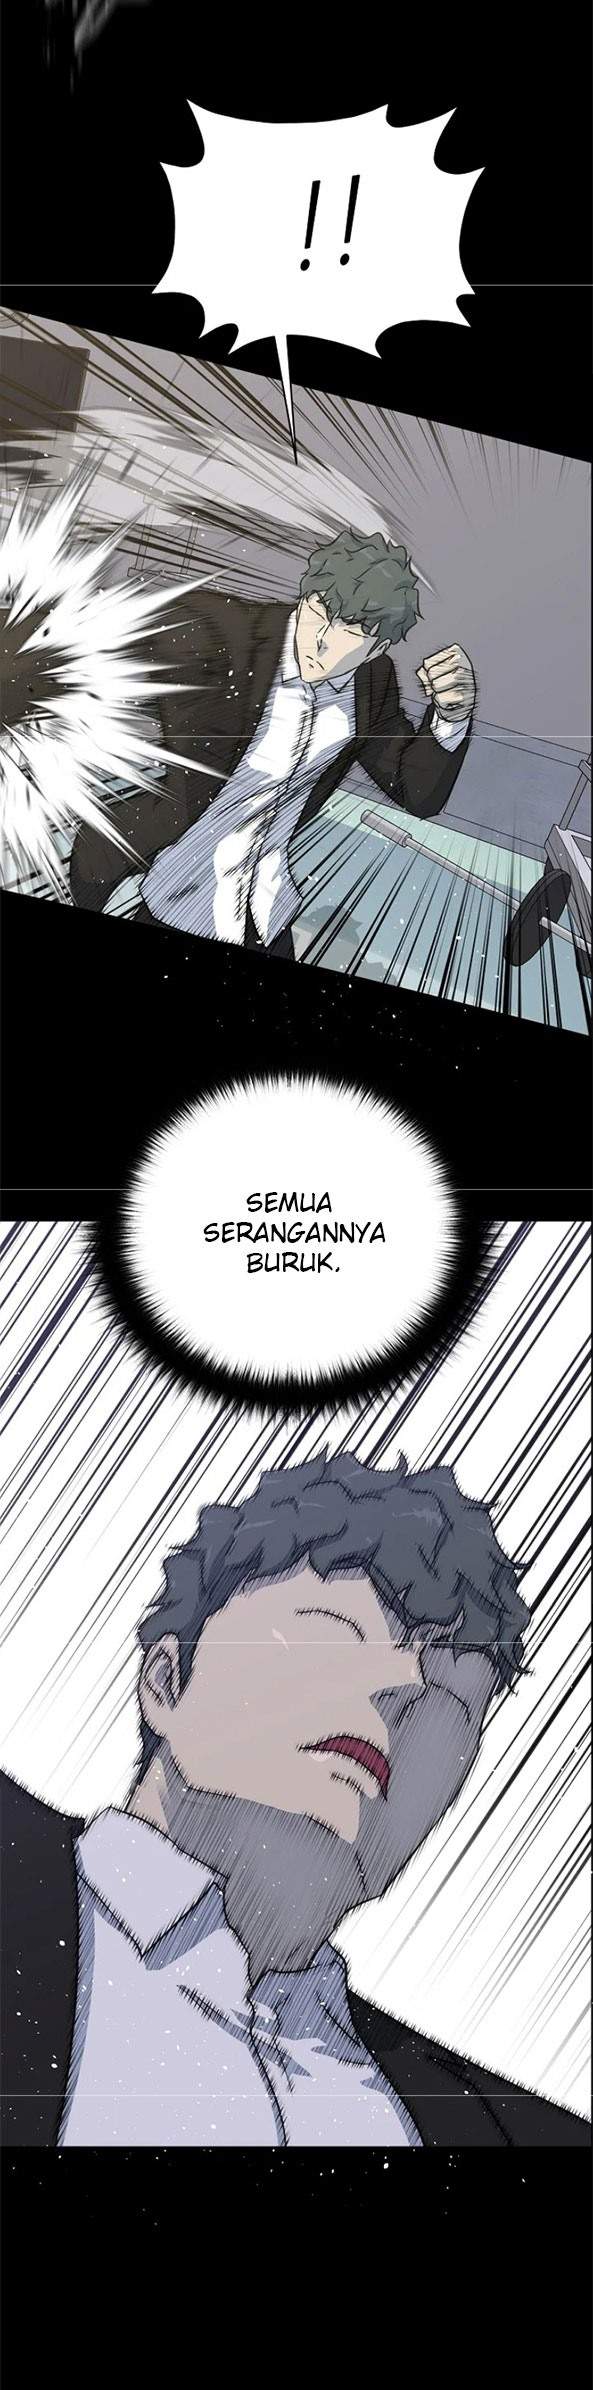 Trigger Chapter 81